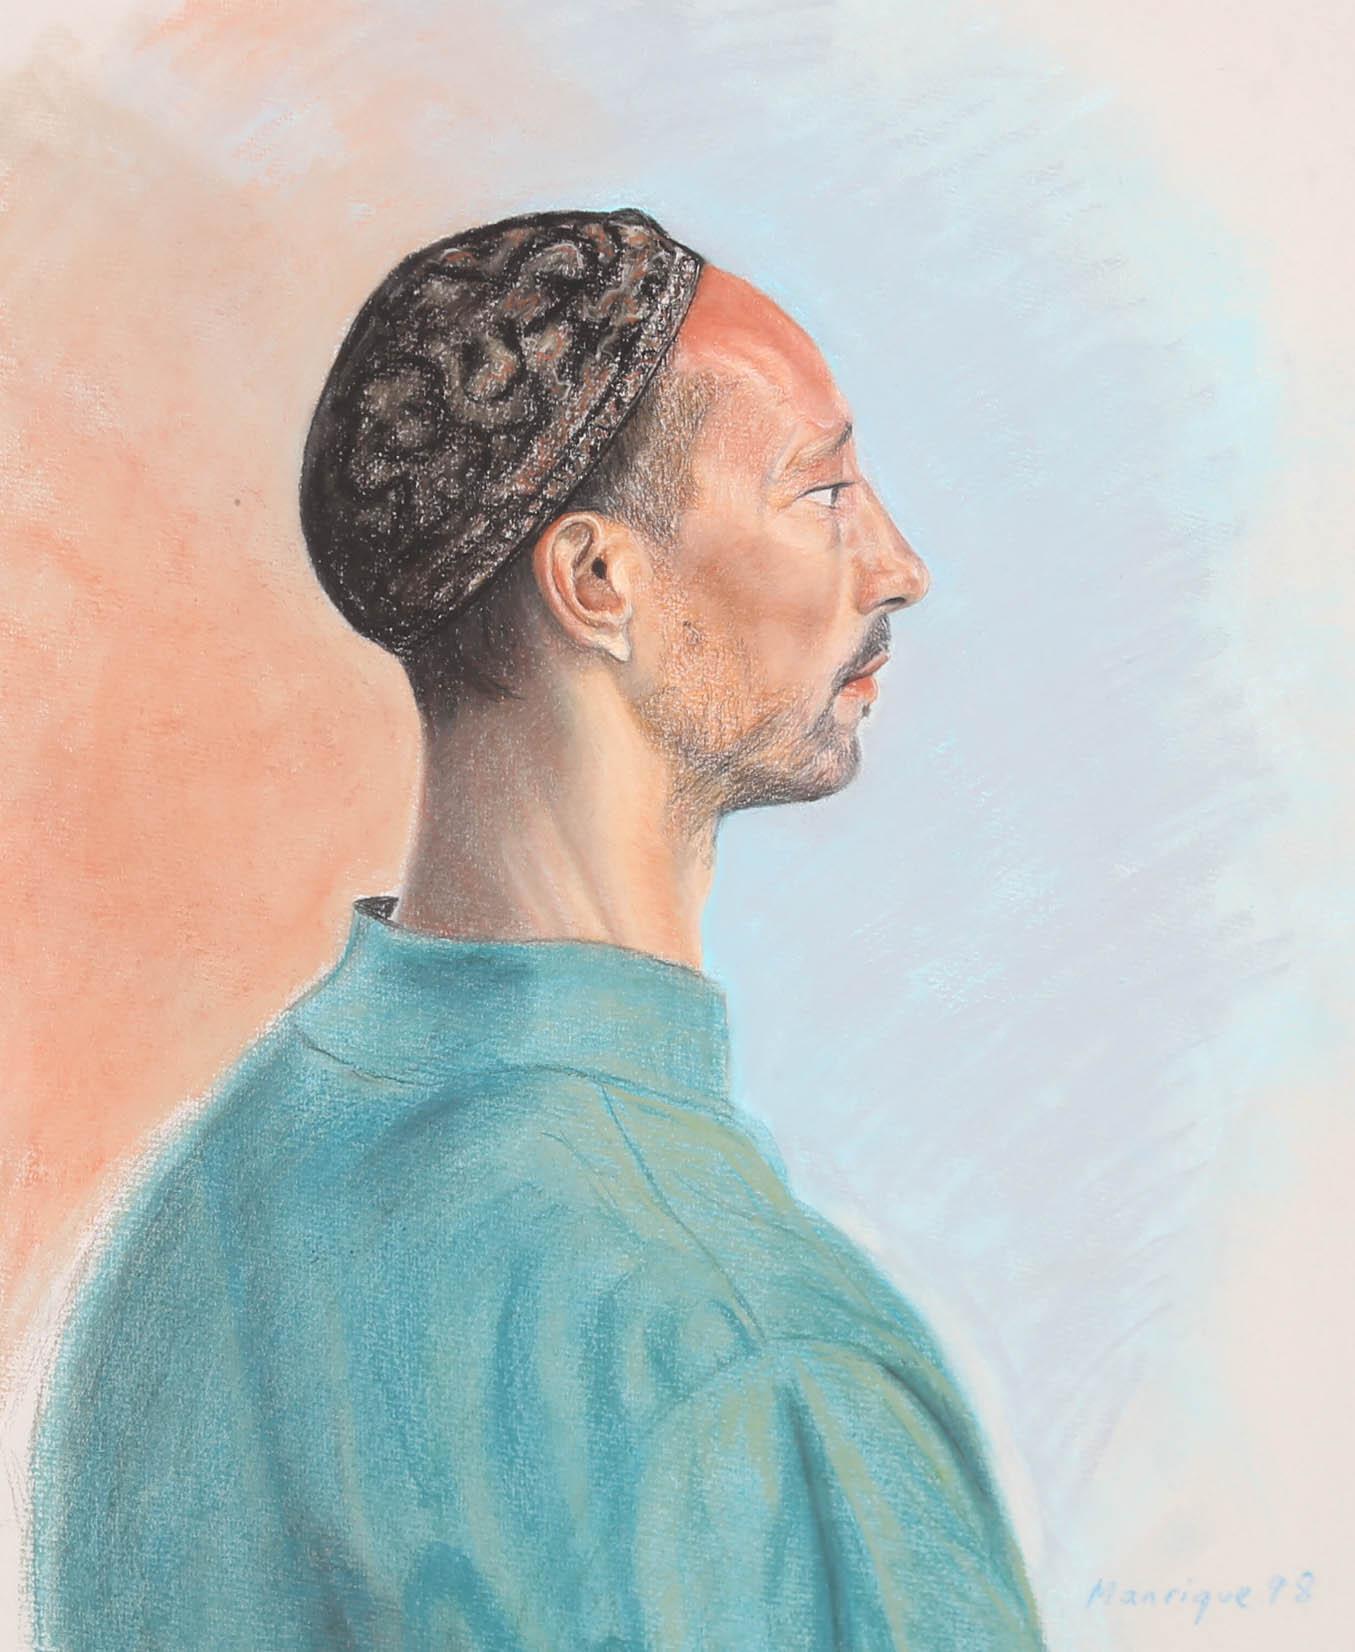 This colourful portrait depicts the profile of a man wearing a blue tunic and a kufi. The artist captures the man in fine pastel detail, highlighting the hyper realistic tones and in his face and clothing. He is portrayed against a soft blue and